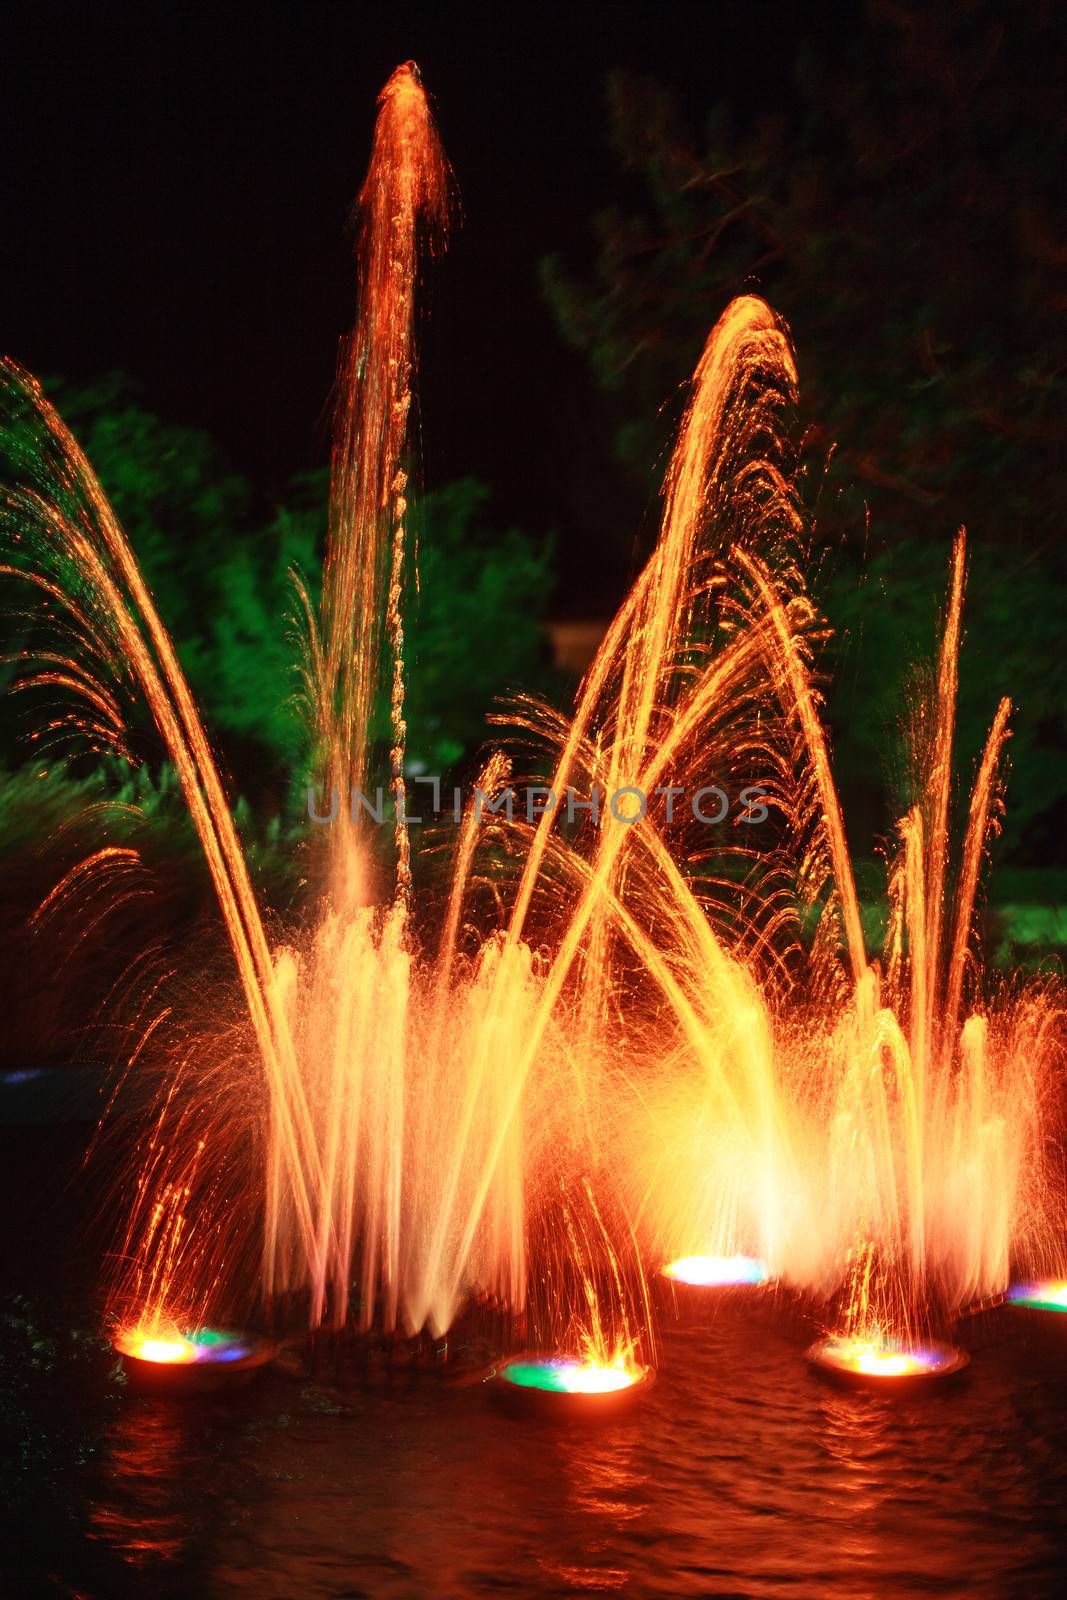 Colourful fiery orange fireworks display with fountains of light on a lake above the water in celebration of a holiday, festival or special event